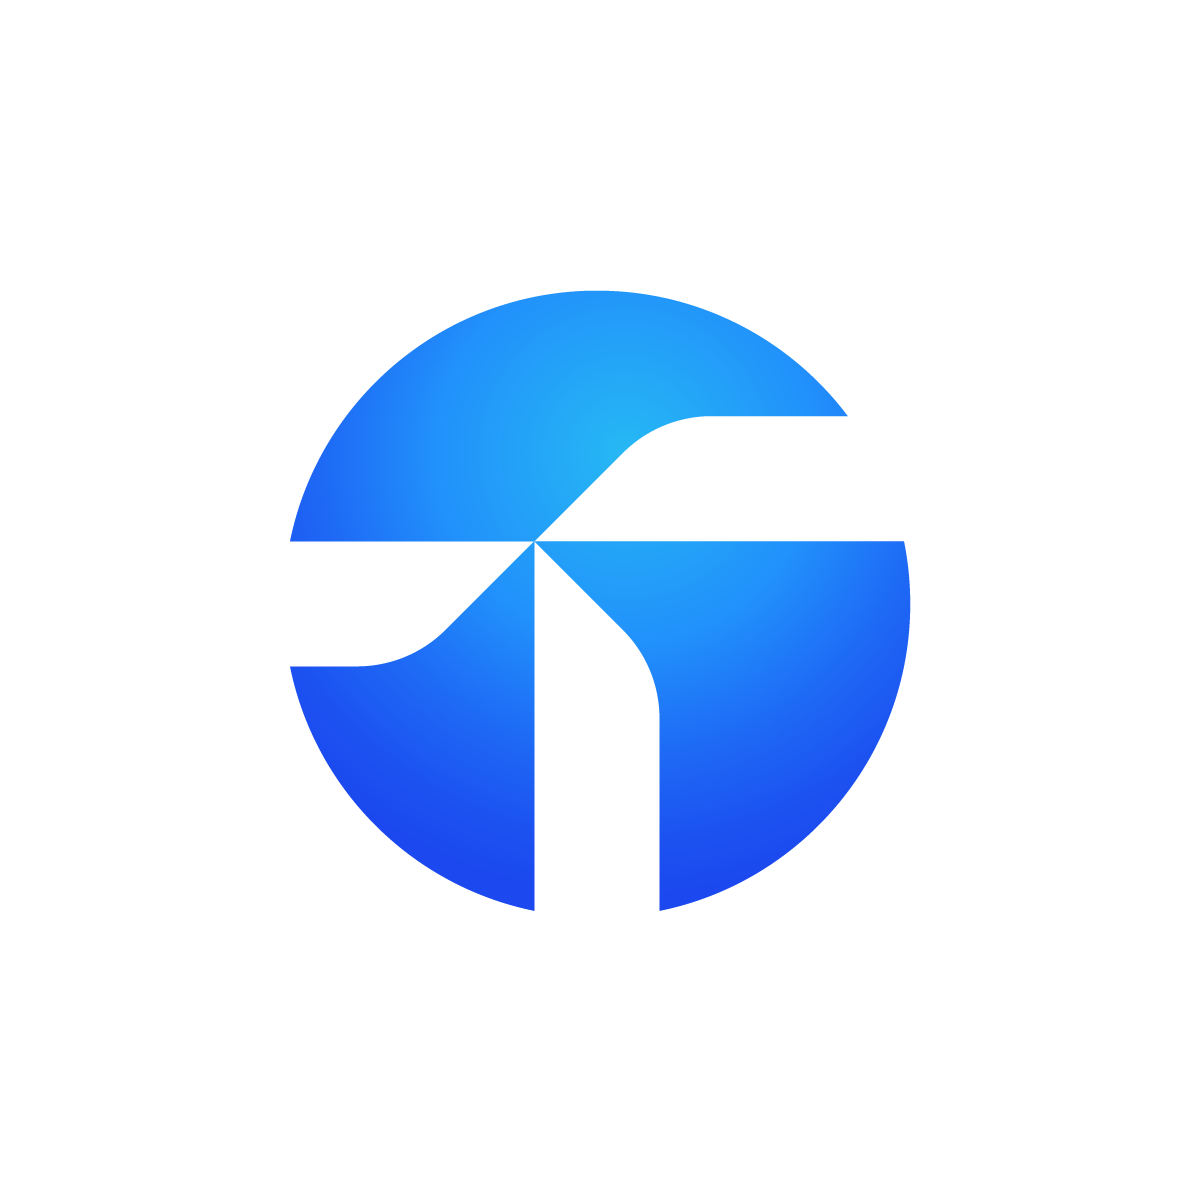 Geometric T Circle Logo: Abstract letter T formed from three similar shapes inside a blue circle